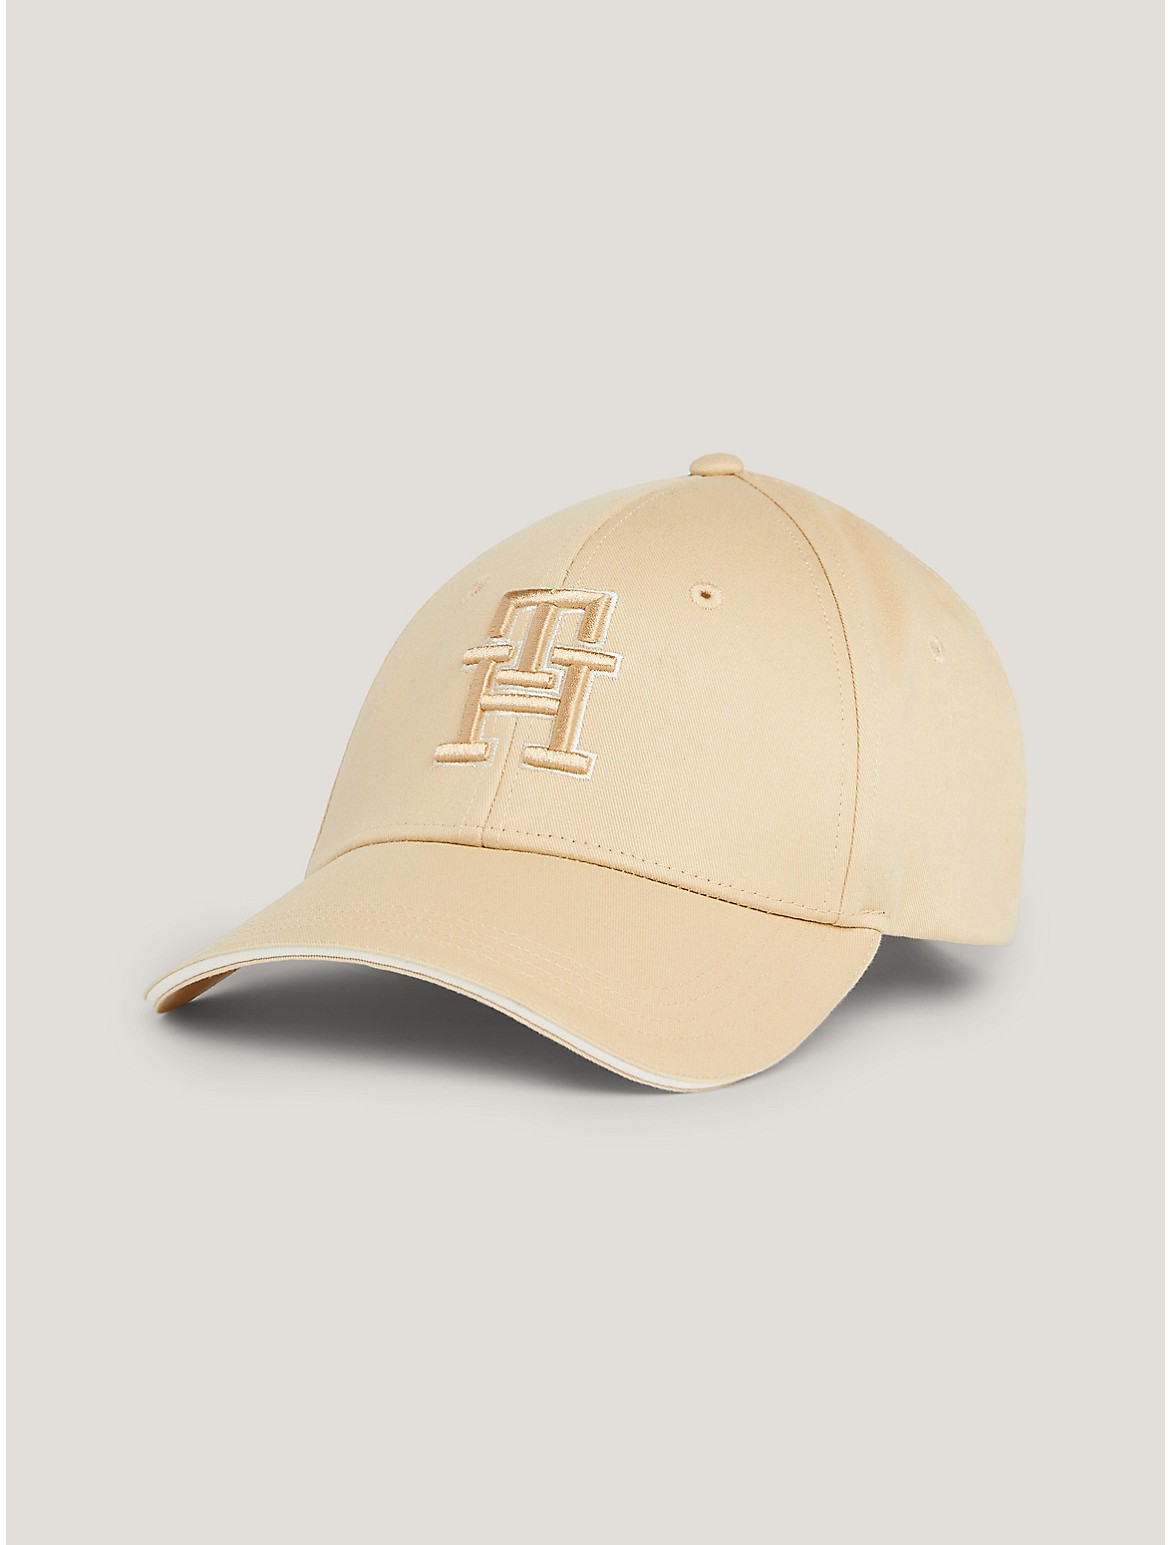 Tommy Hilfiger Women's Embroidered TH Baseball Cap